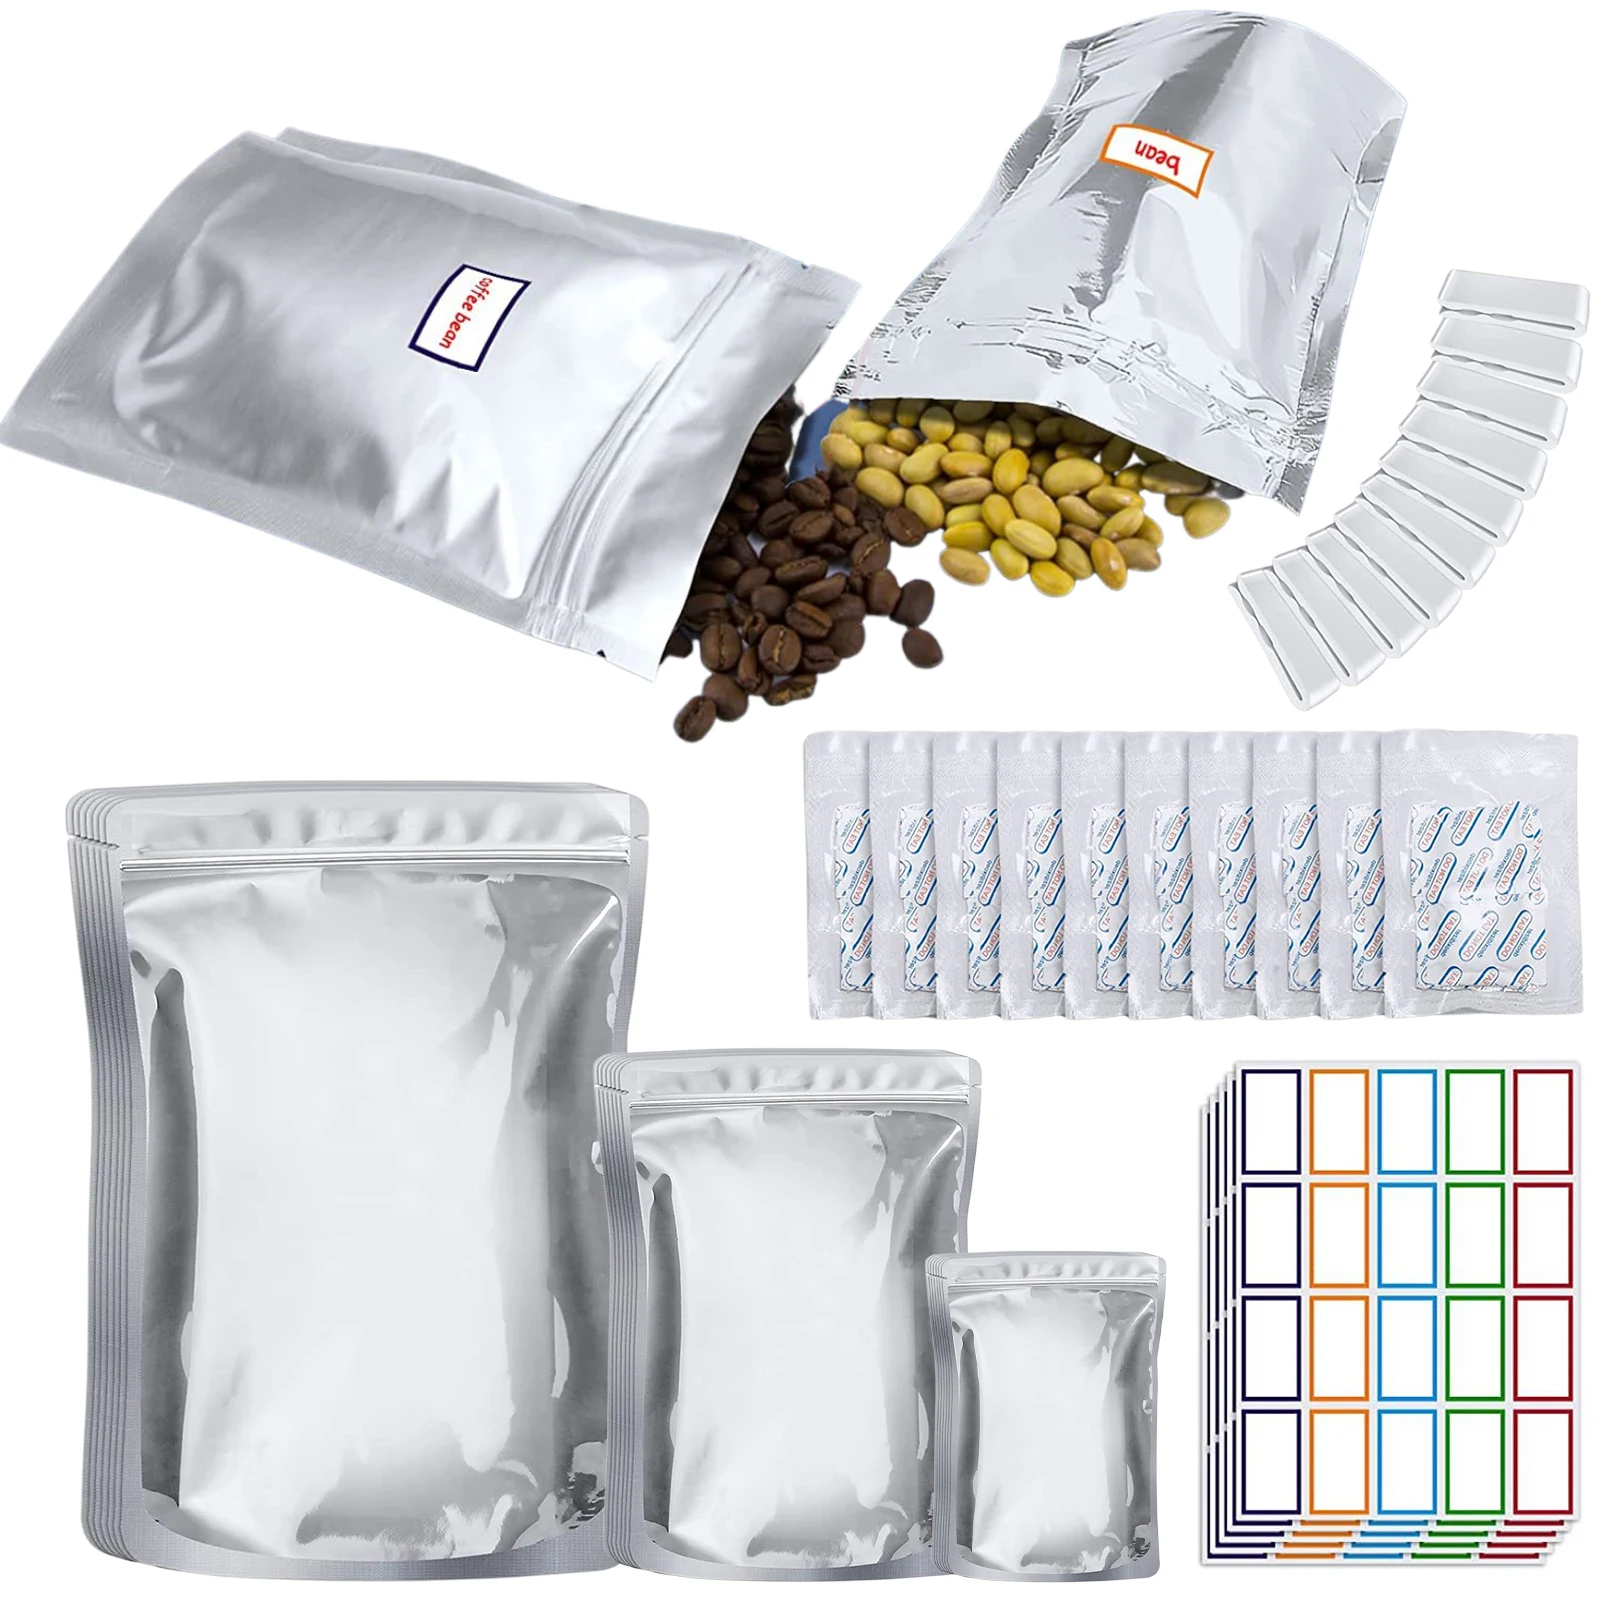 

100Pcs Mylar Bags for Food Storage Thicken Reusable Heat Sealable Airtight Smell Proof Packaging Baggies with Oxygen Absorbers